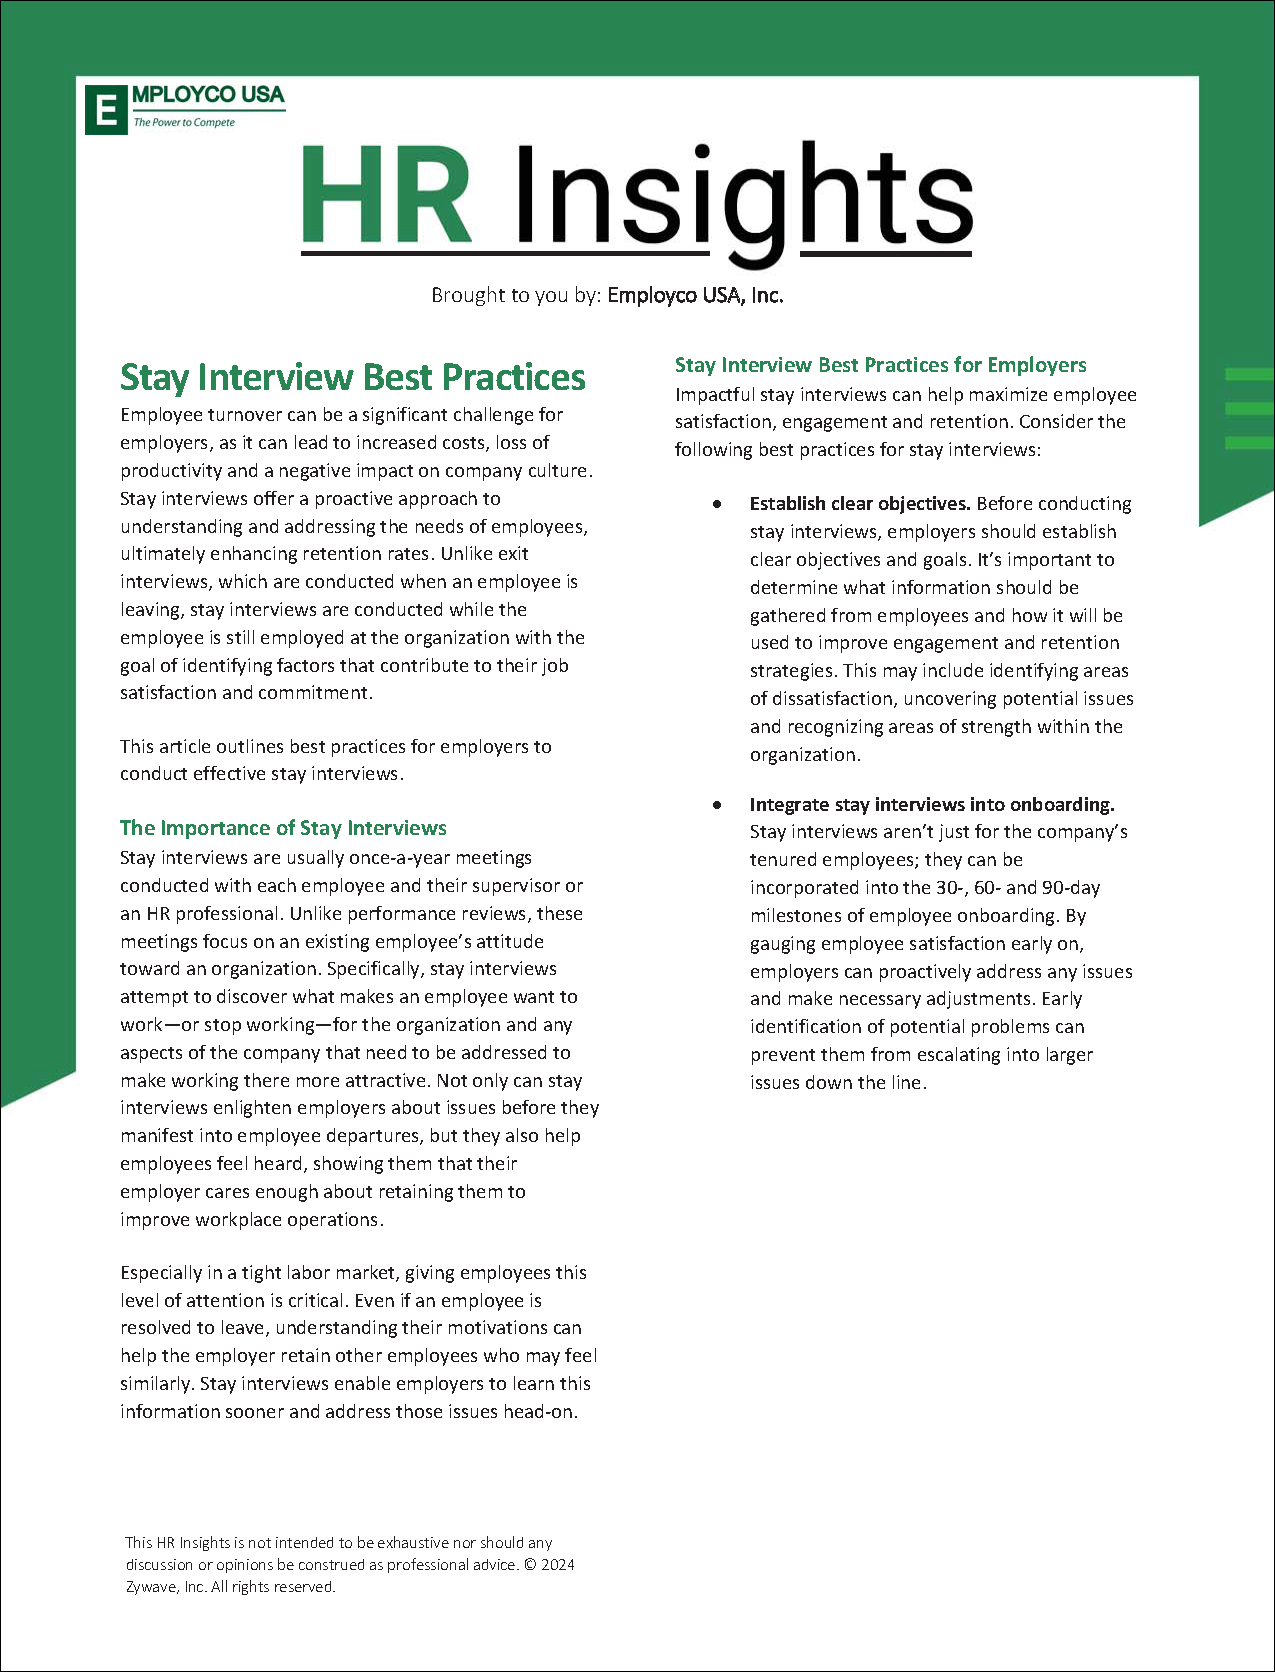 HR Insights: Stay Interview Best Practices